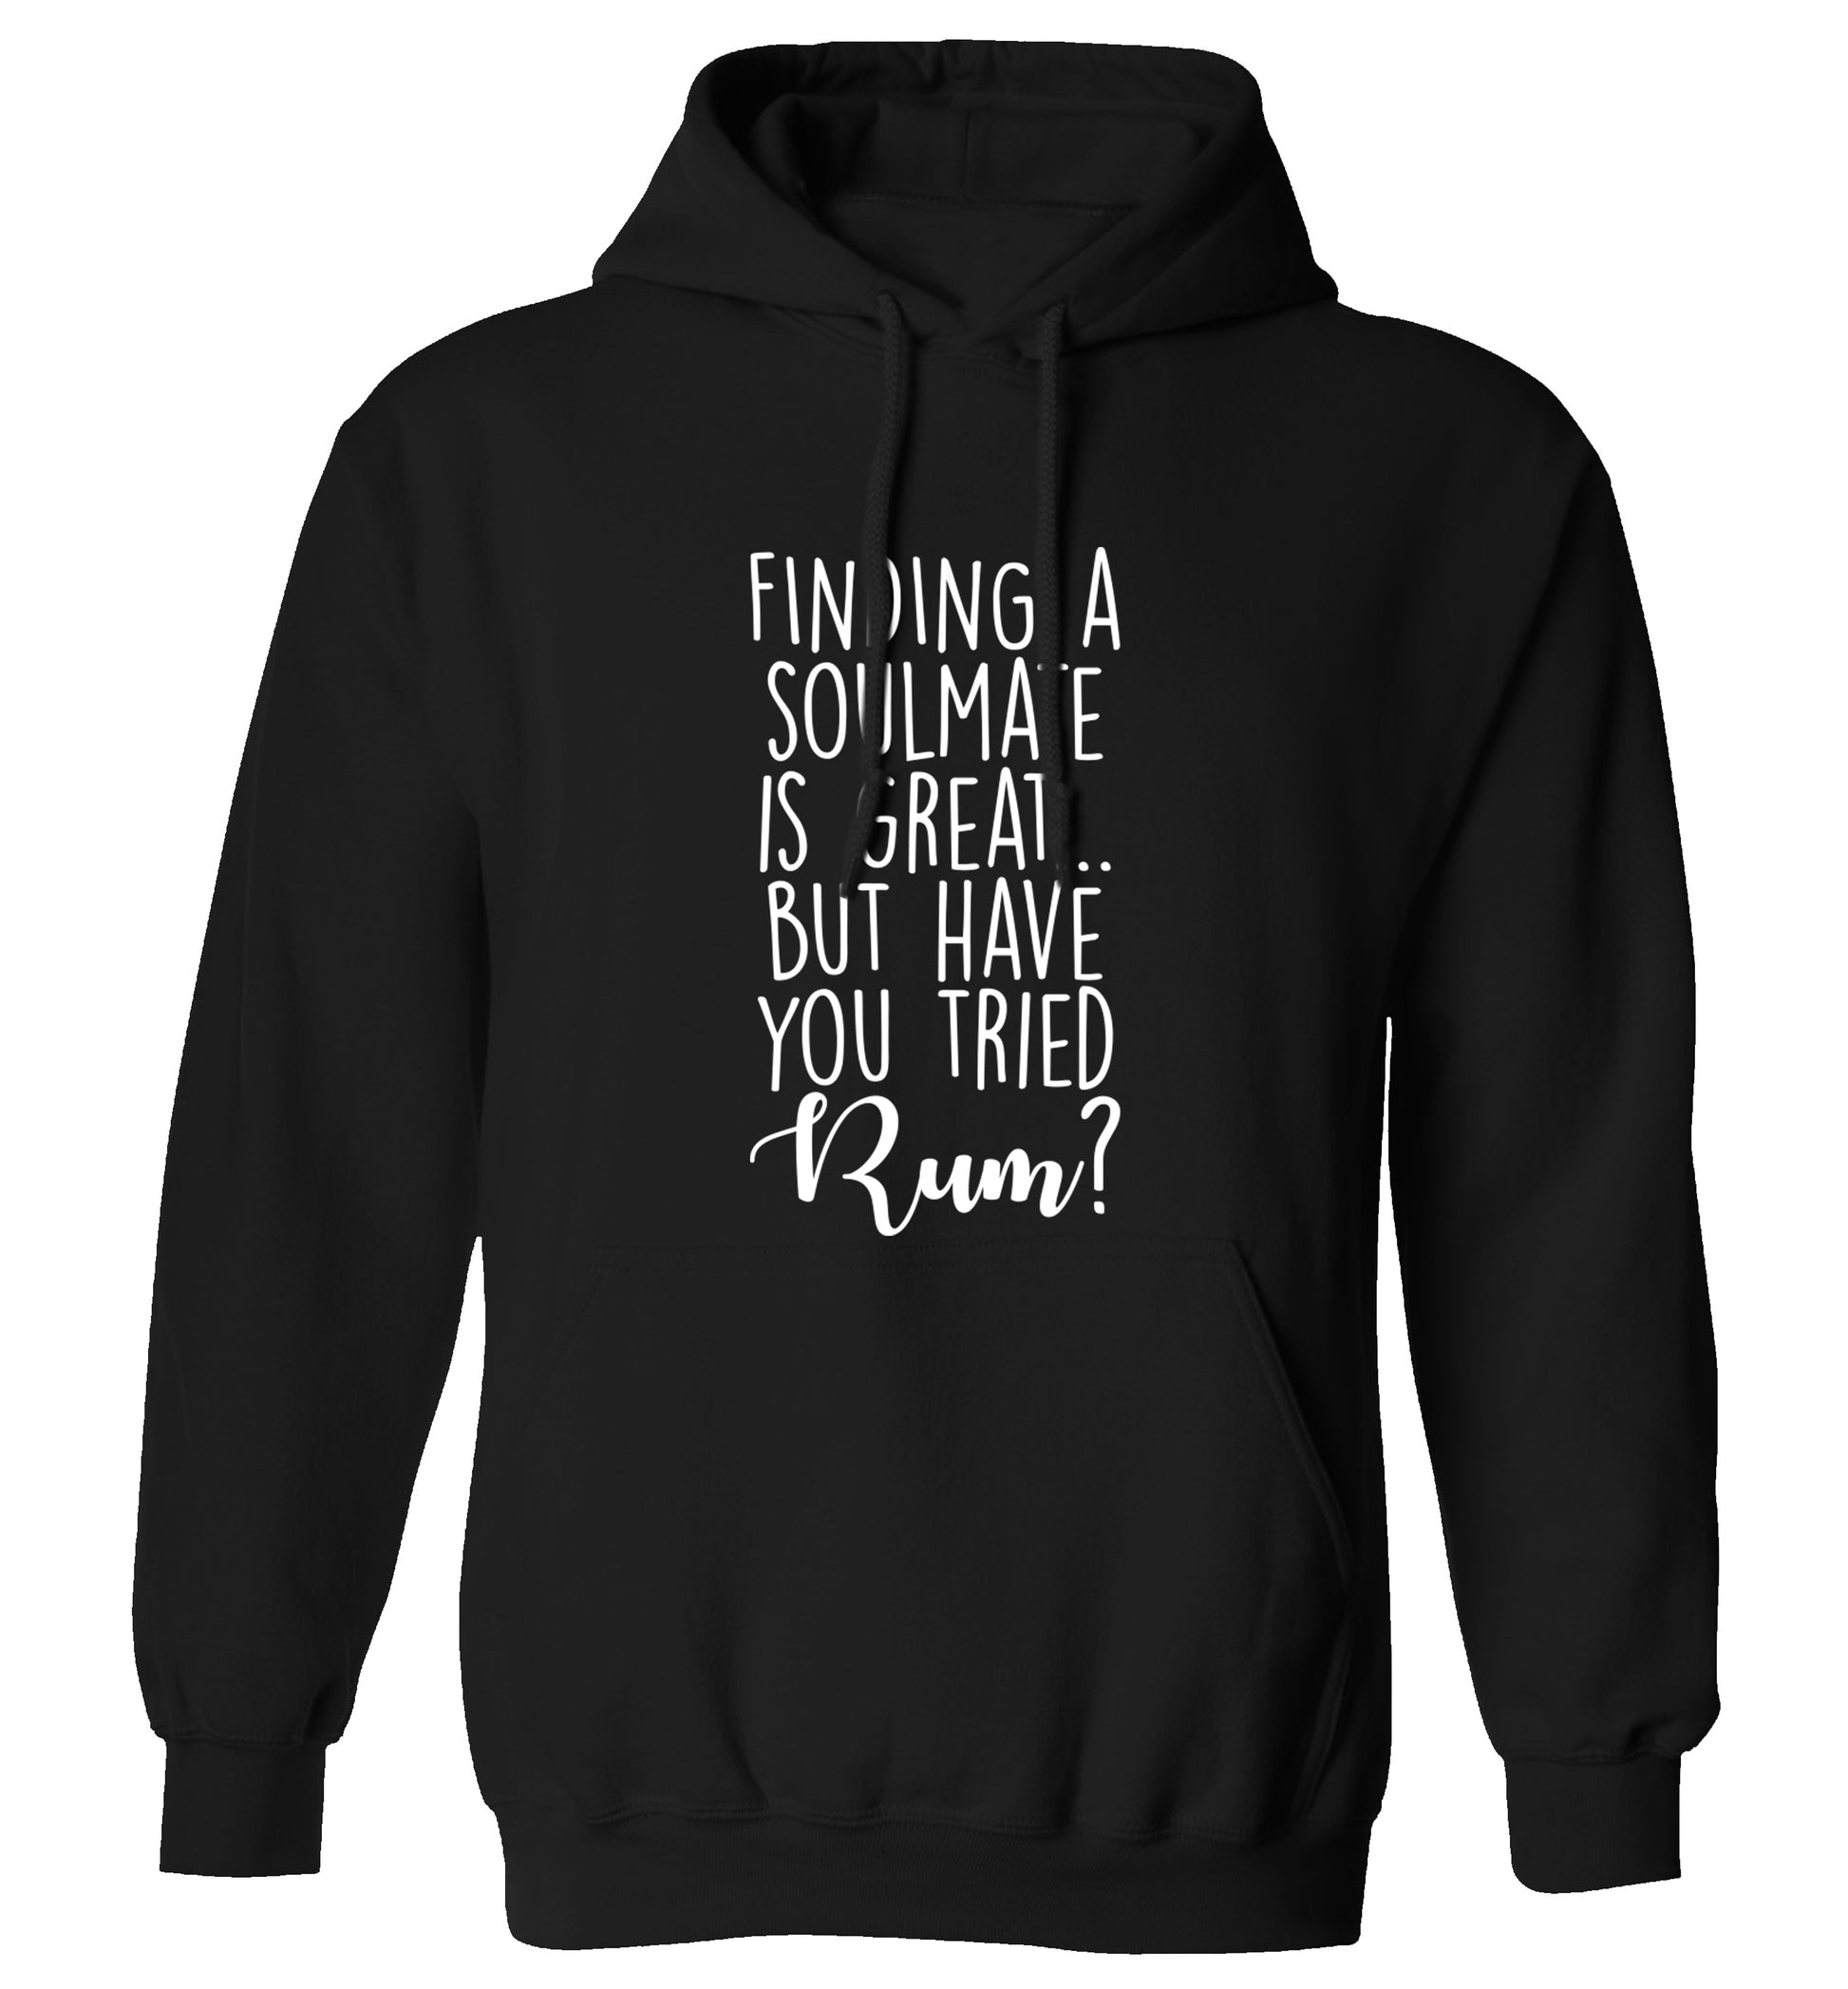 Finding a soulmate is great but have you tried rum? adults unisex black hoodie 2XL